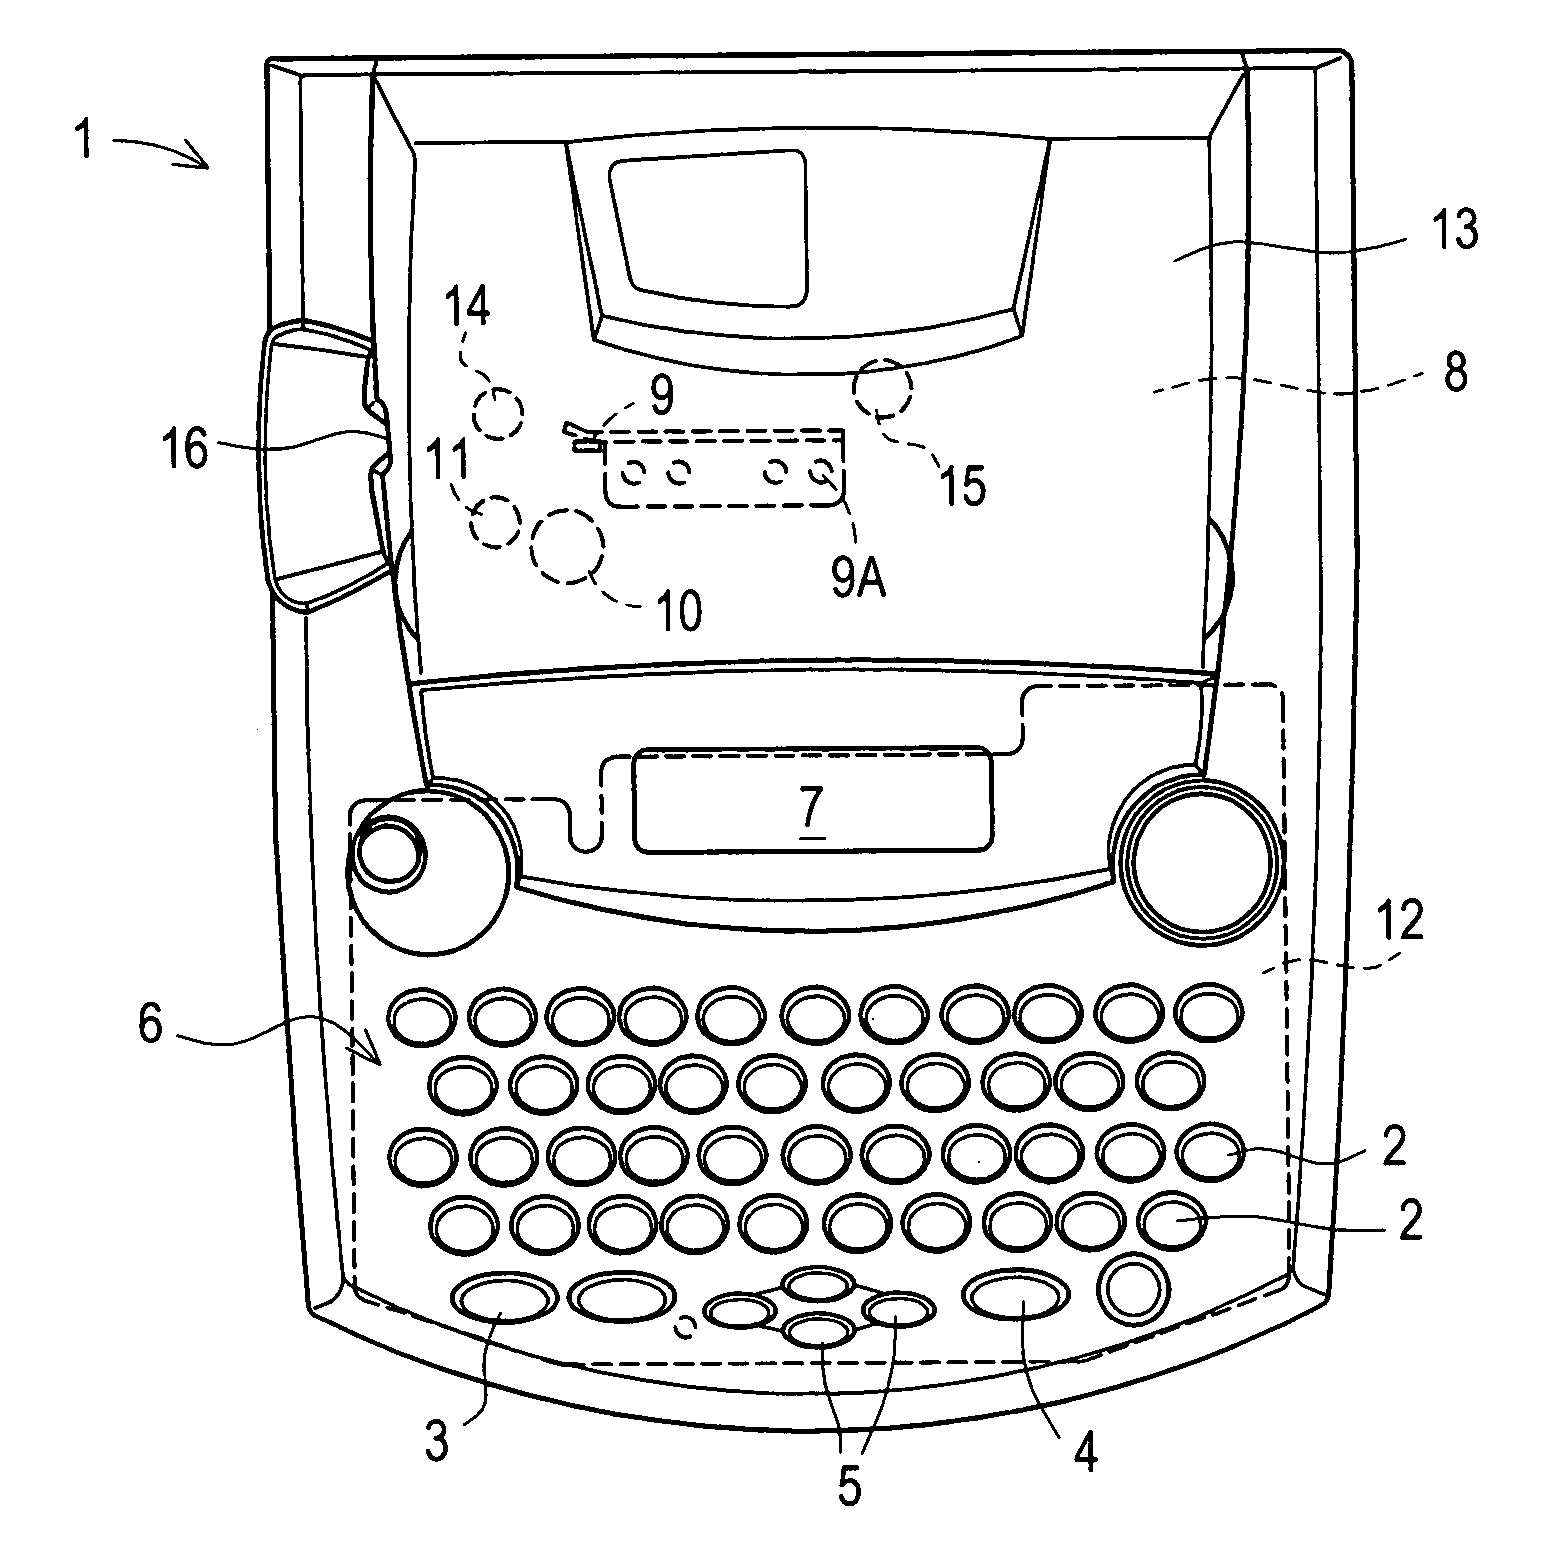 Tape Cassette and Tape Printing Apparatus